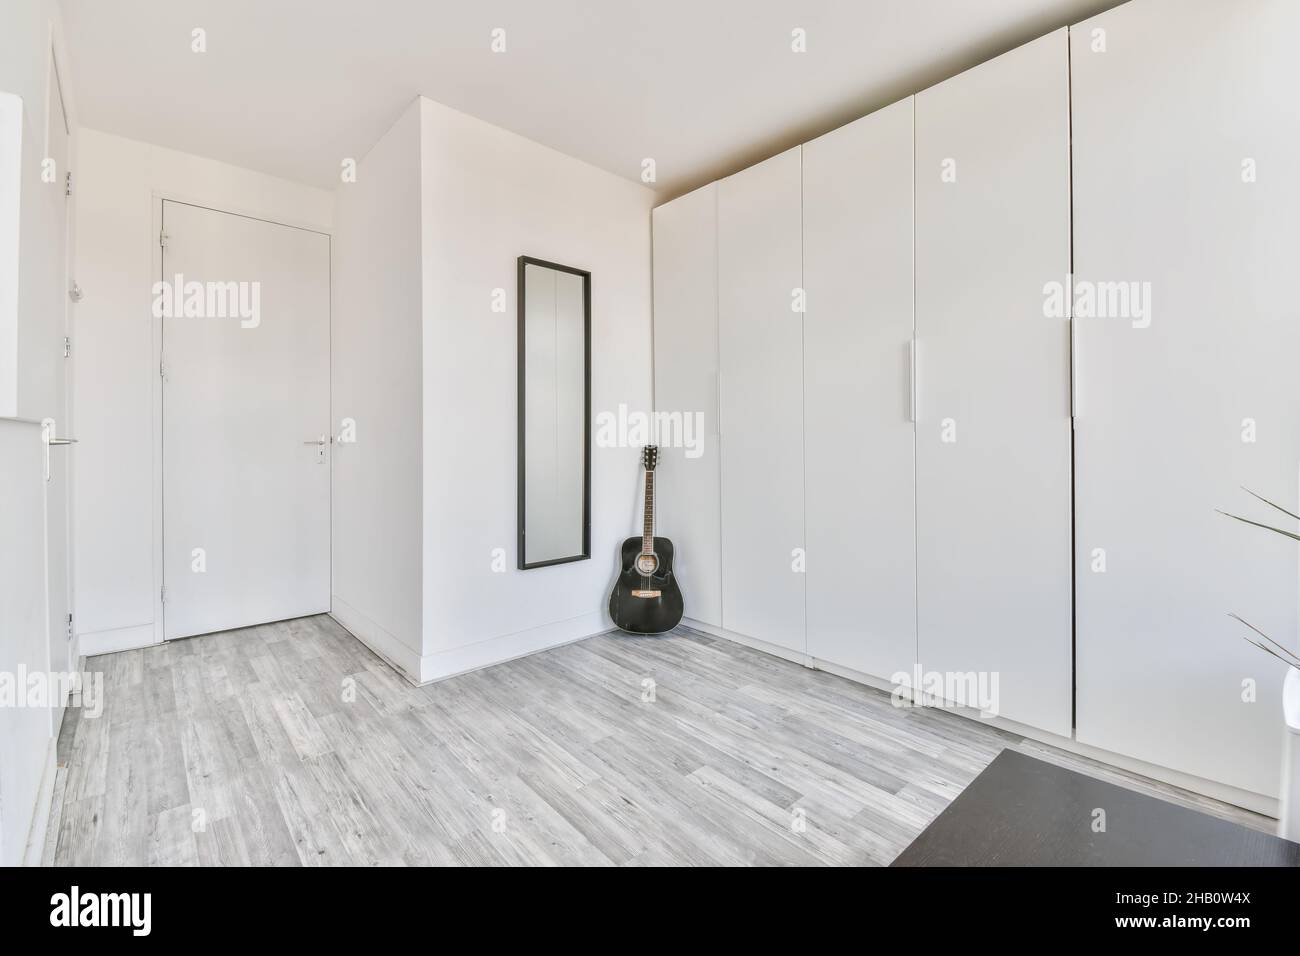 Cozy room with a large white wall cabinet and a guitar Stock Photo